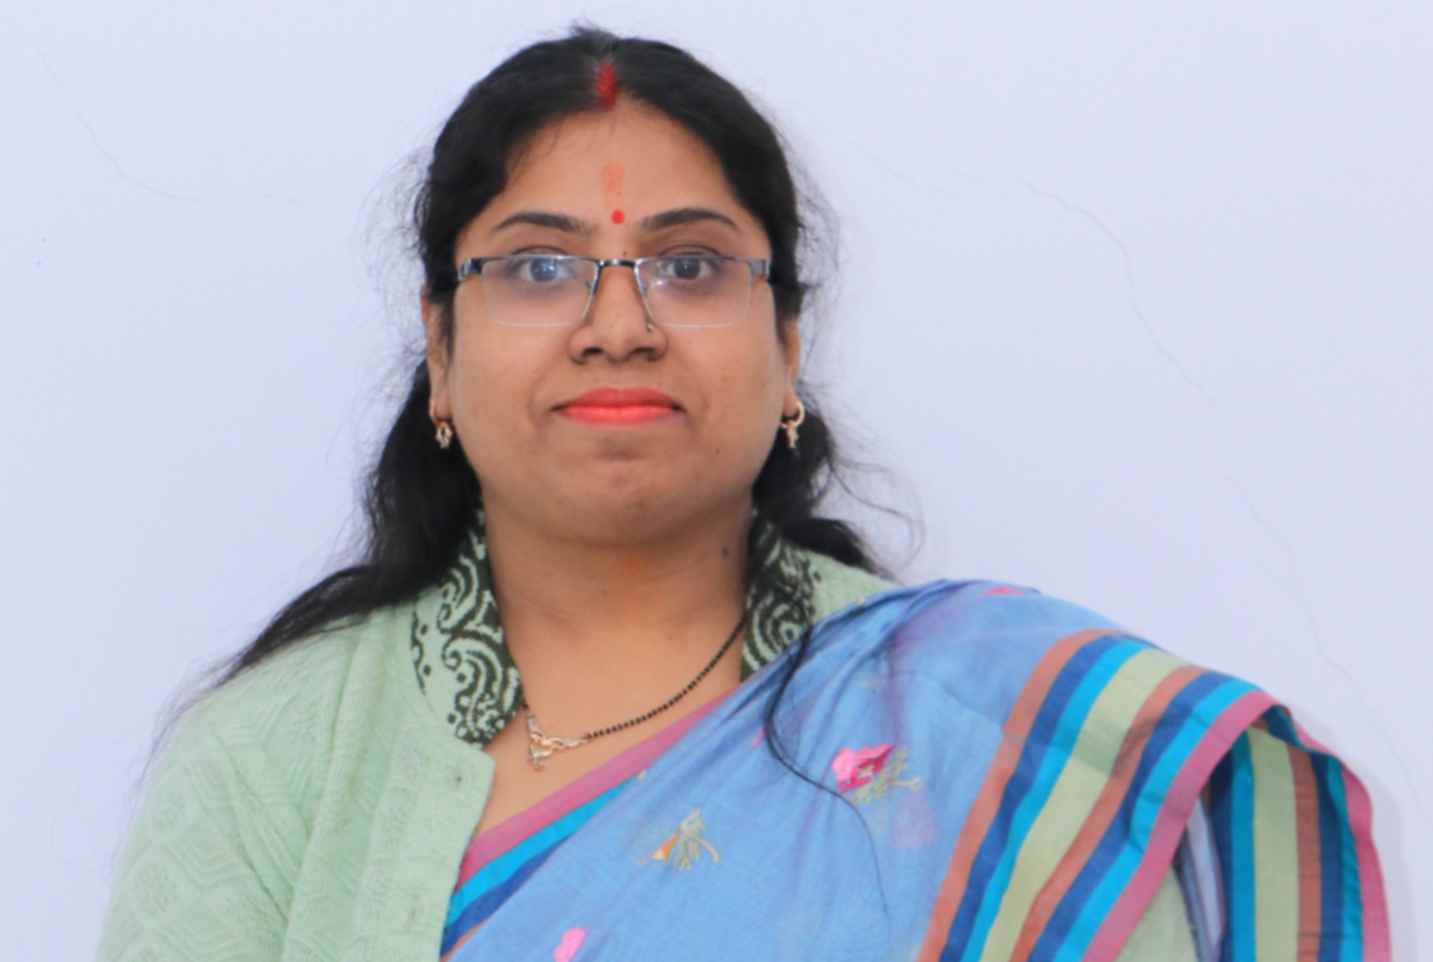 Dr. SHAILY AGRAWAL